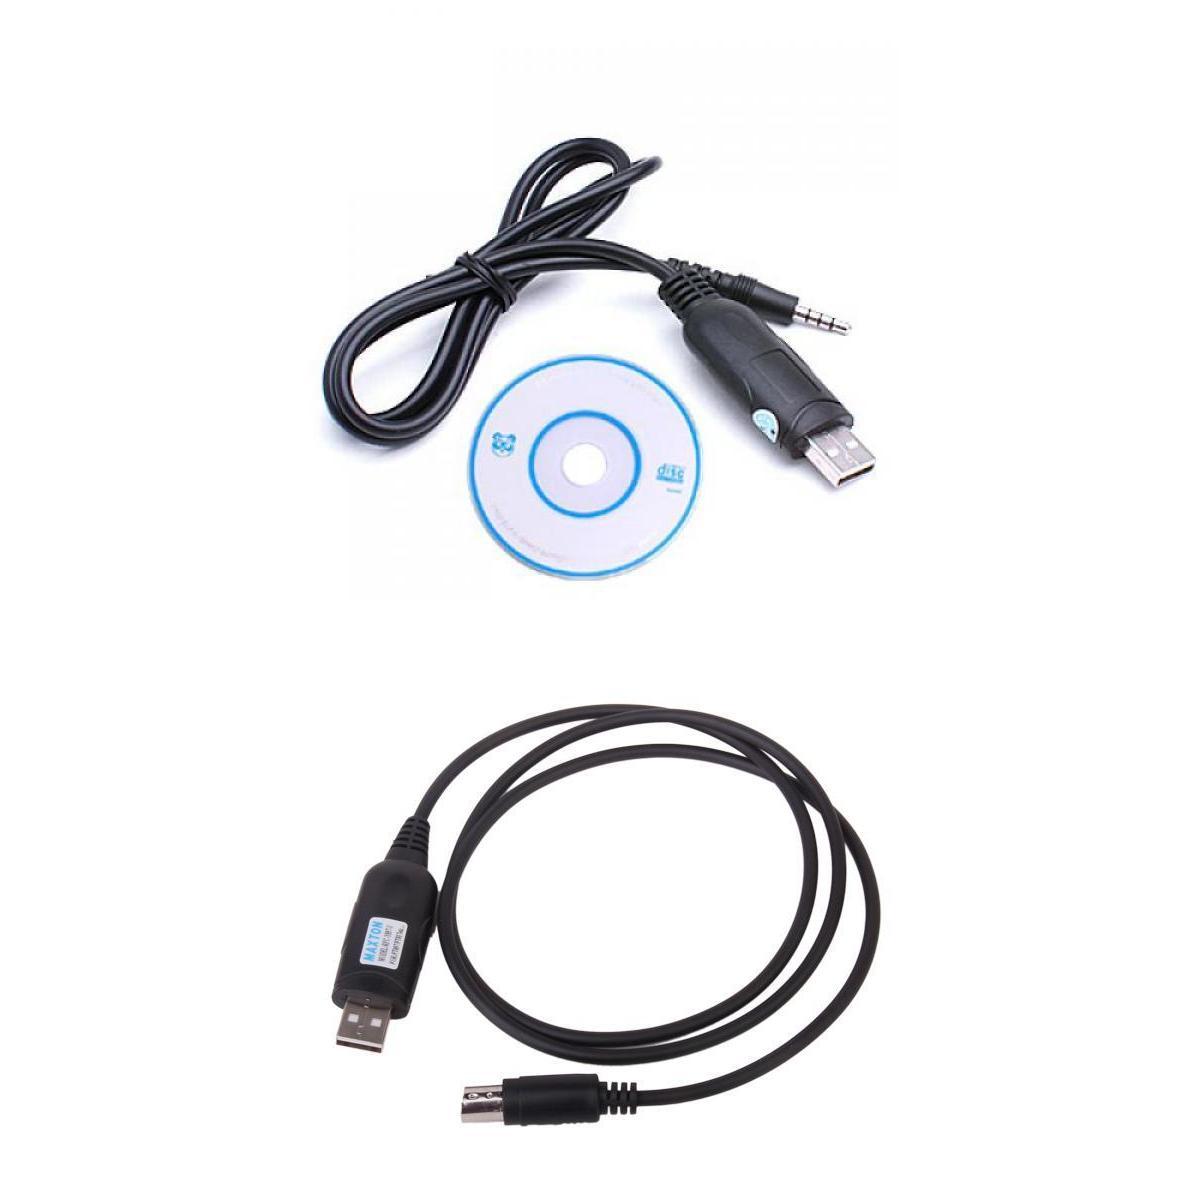 USB Programming Cable for  Vertex+RPC-Y7800-U Programming Cable w/ CD